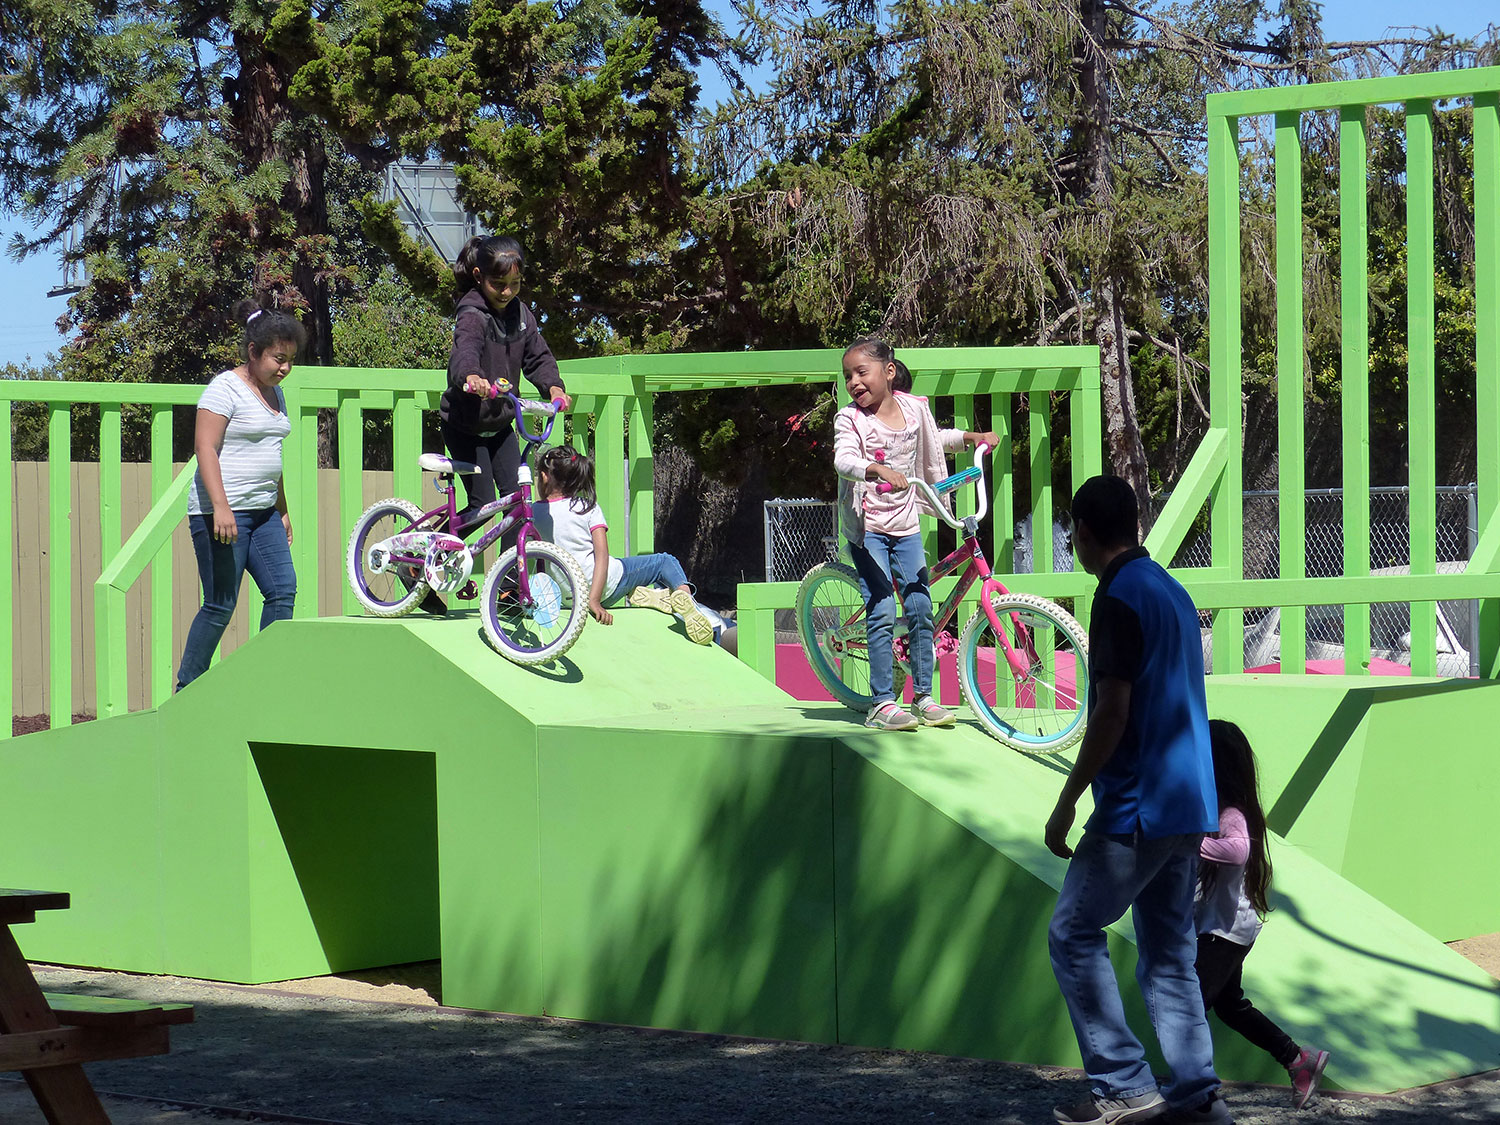 children biking and climbing on green outdoor play structure